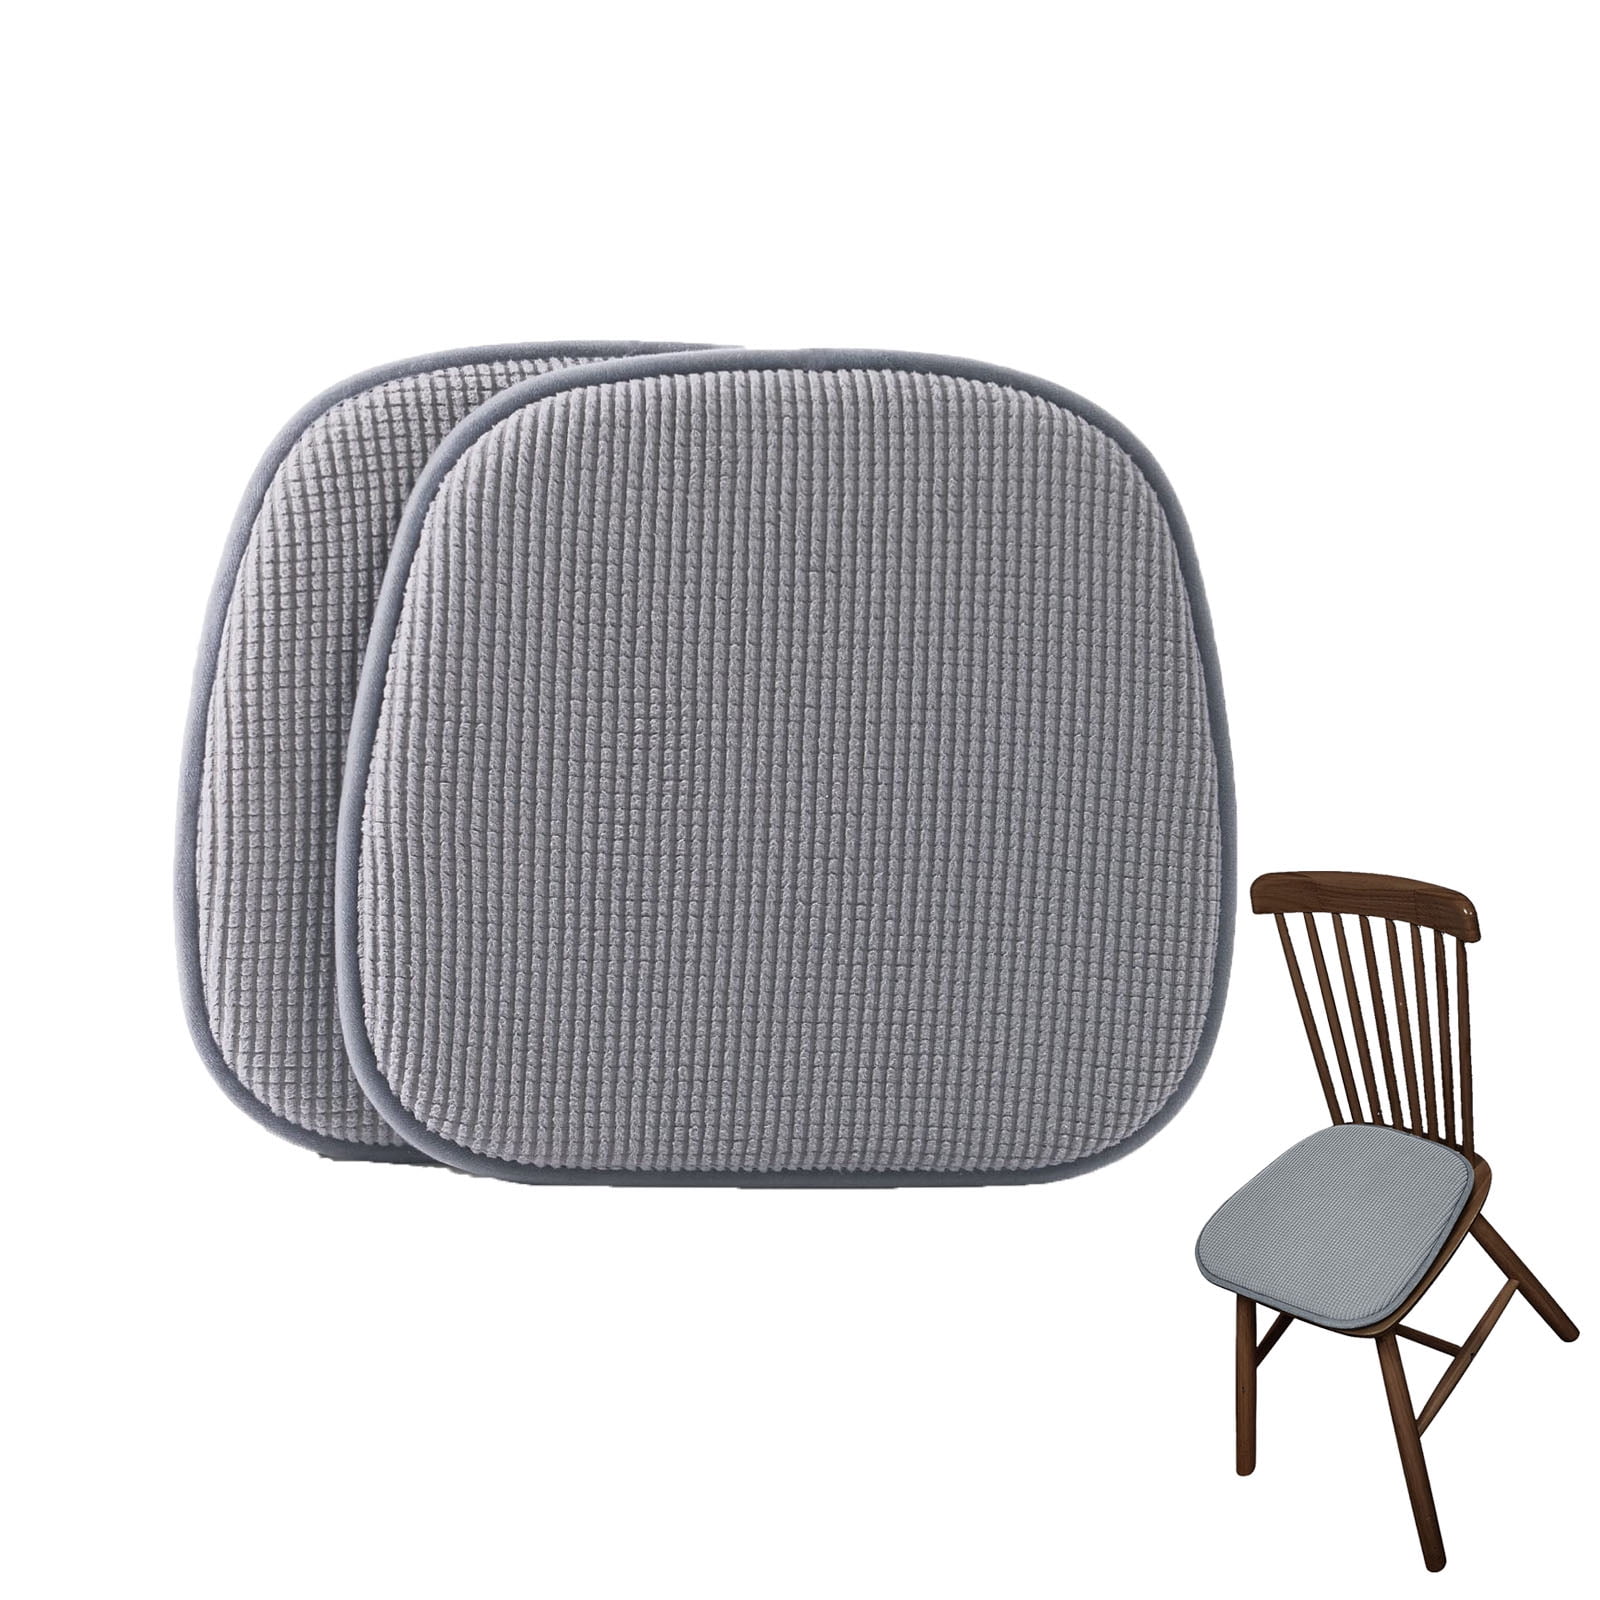 Walbest 15.75 x 15.75 Dining Chair Cushion, Soft Chair Pad Seat Cushion,  Tie on Seat for Non-Slip Support, Durable, Superior Comfort and Softness